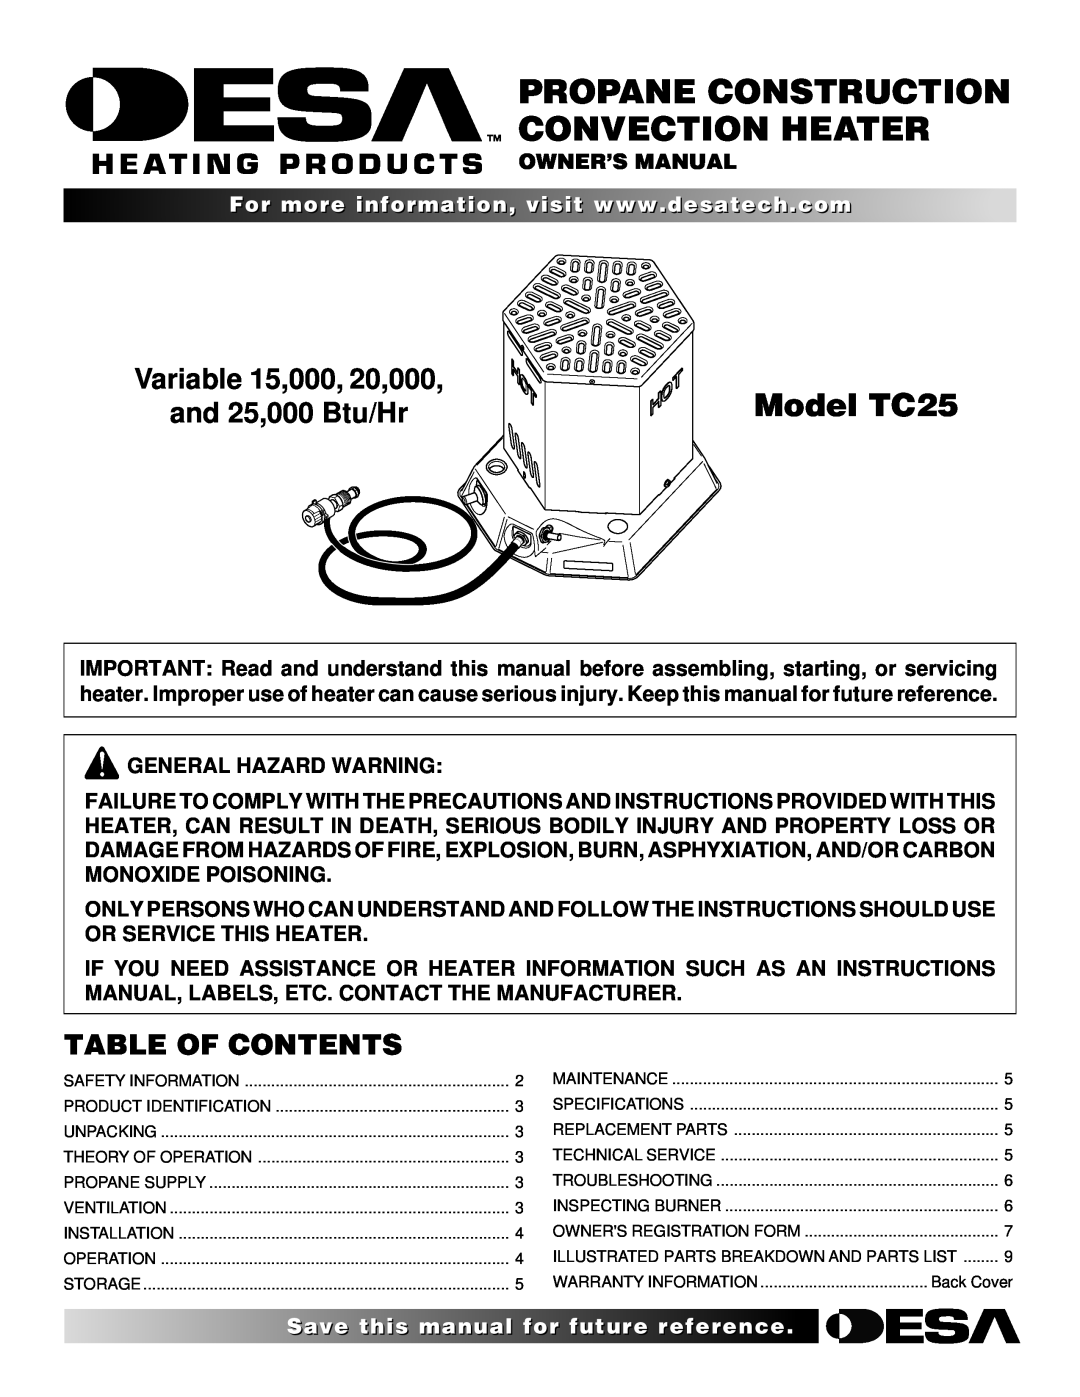 Desa owner manual Model TC25, Variable 15,000, 20,000 and 25,000 Btu/Hr, Table Of Contents 